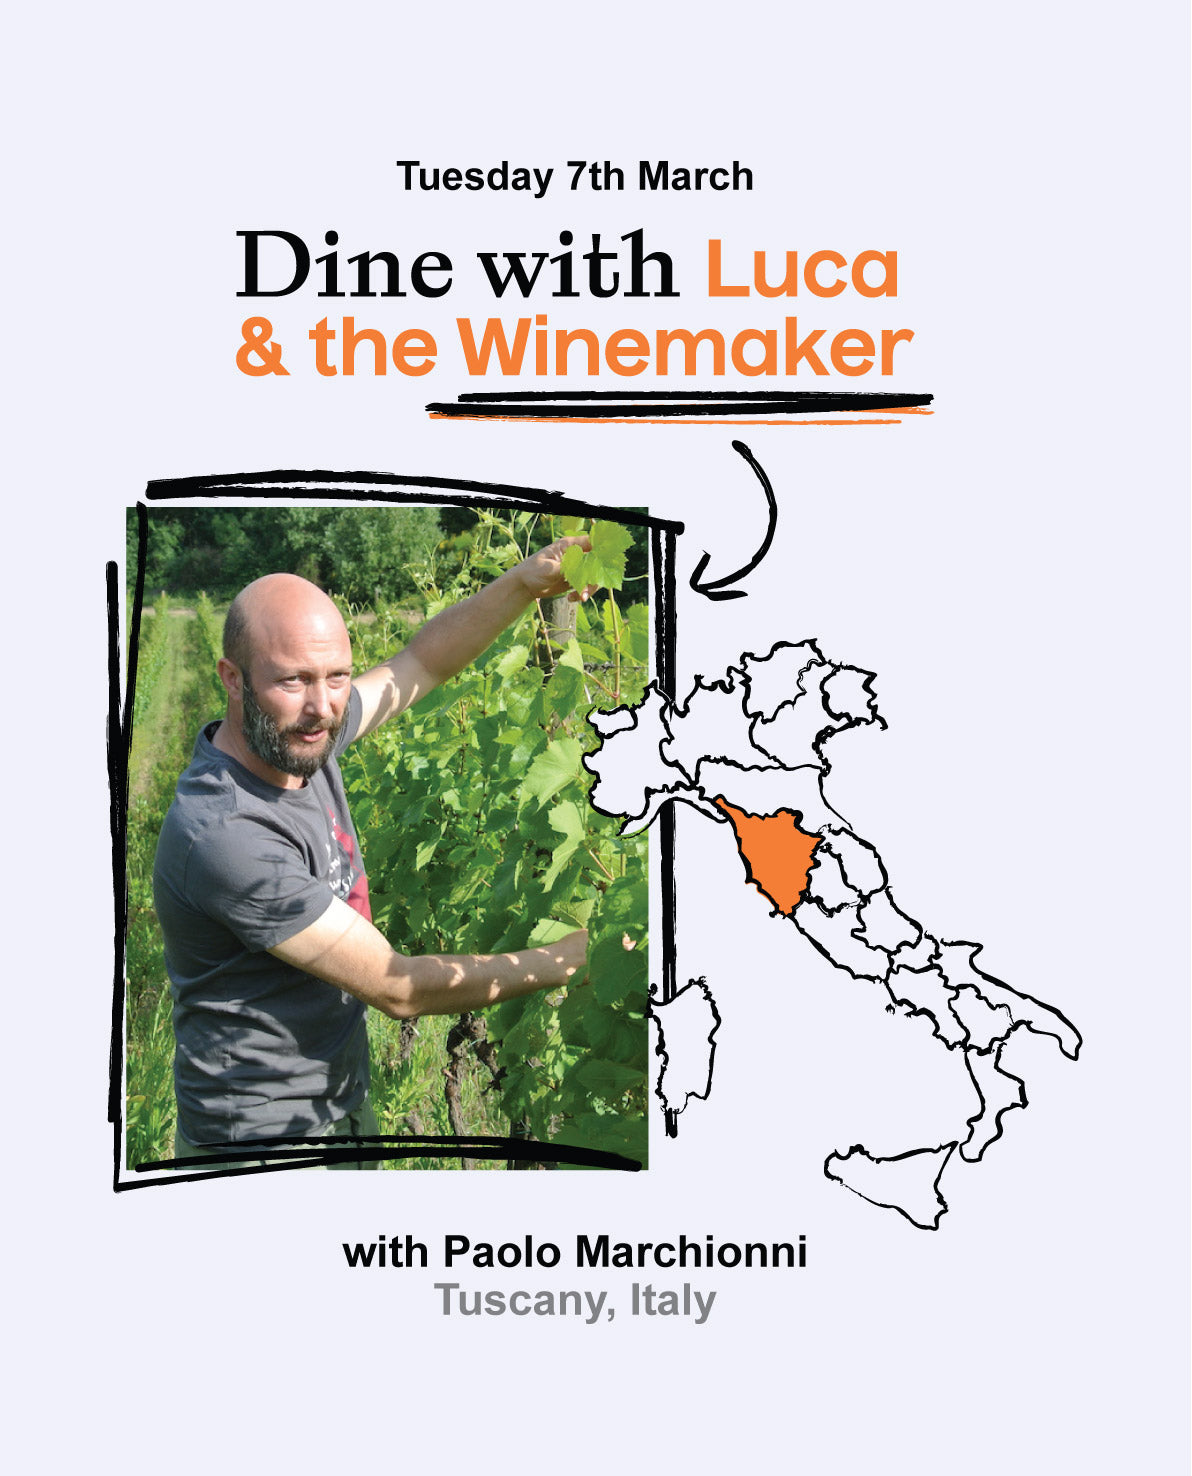 Dine with Luca & Paolo Marchionni - Tuscany